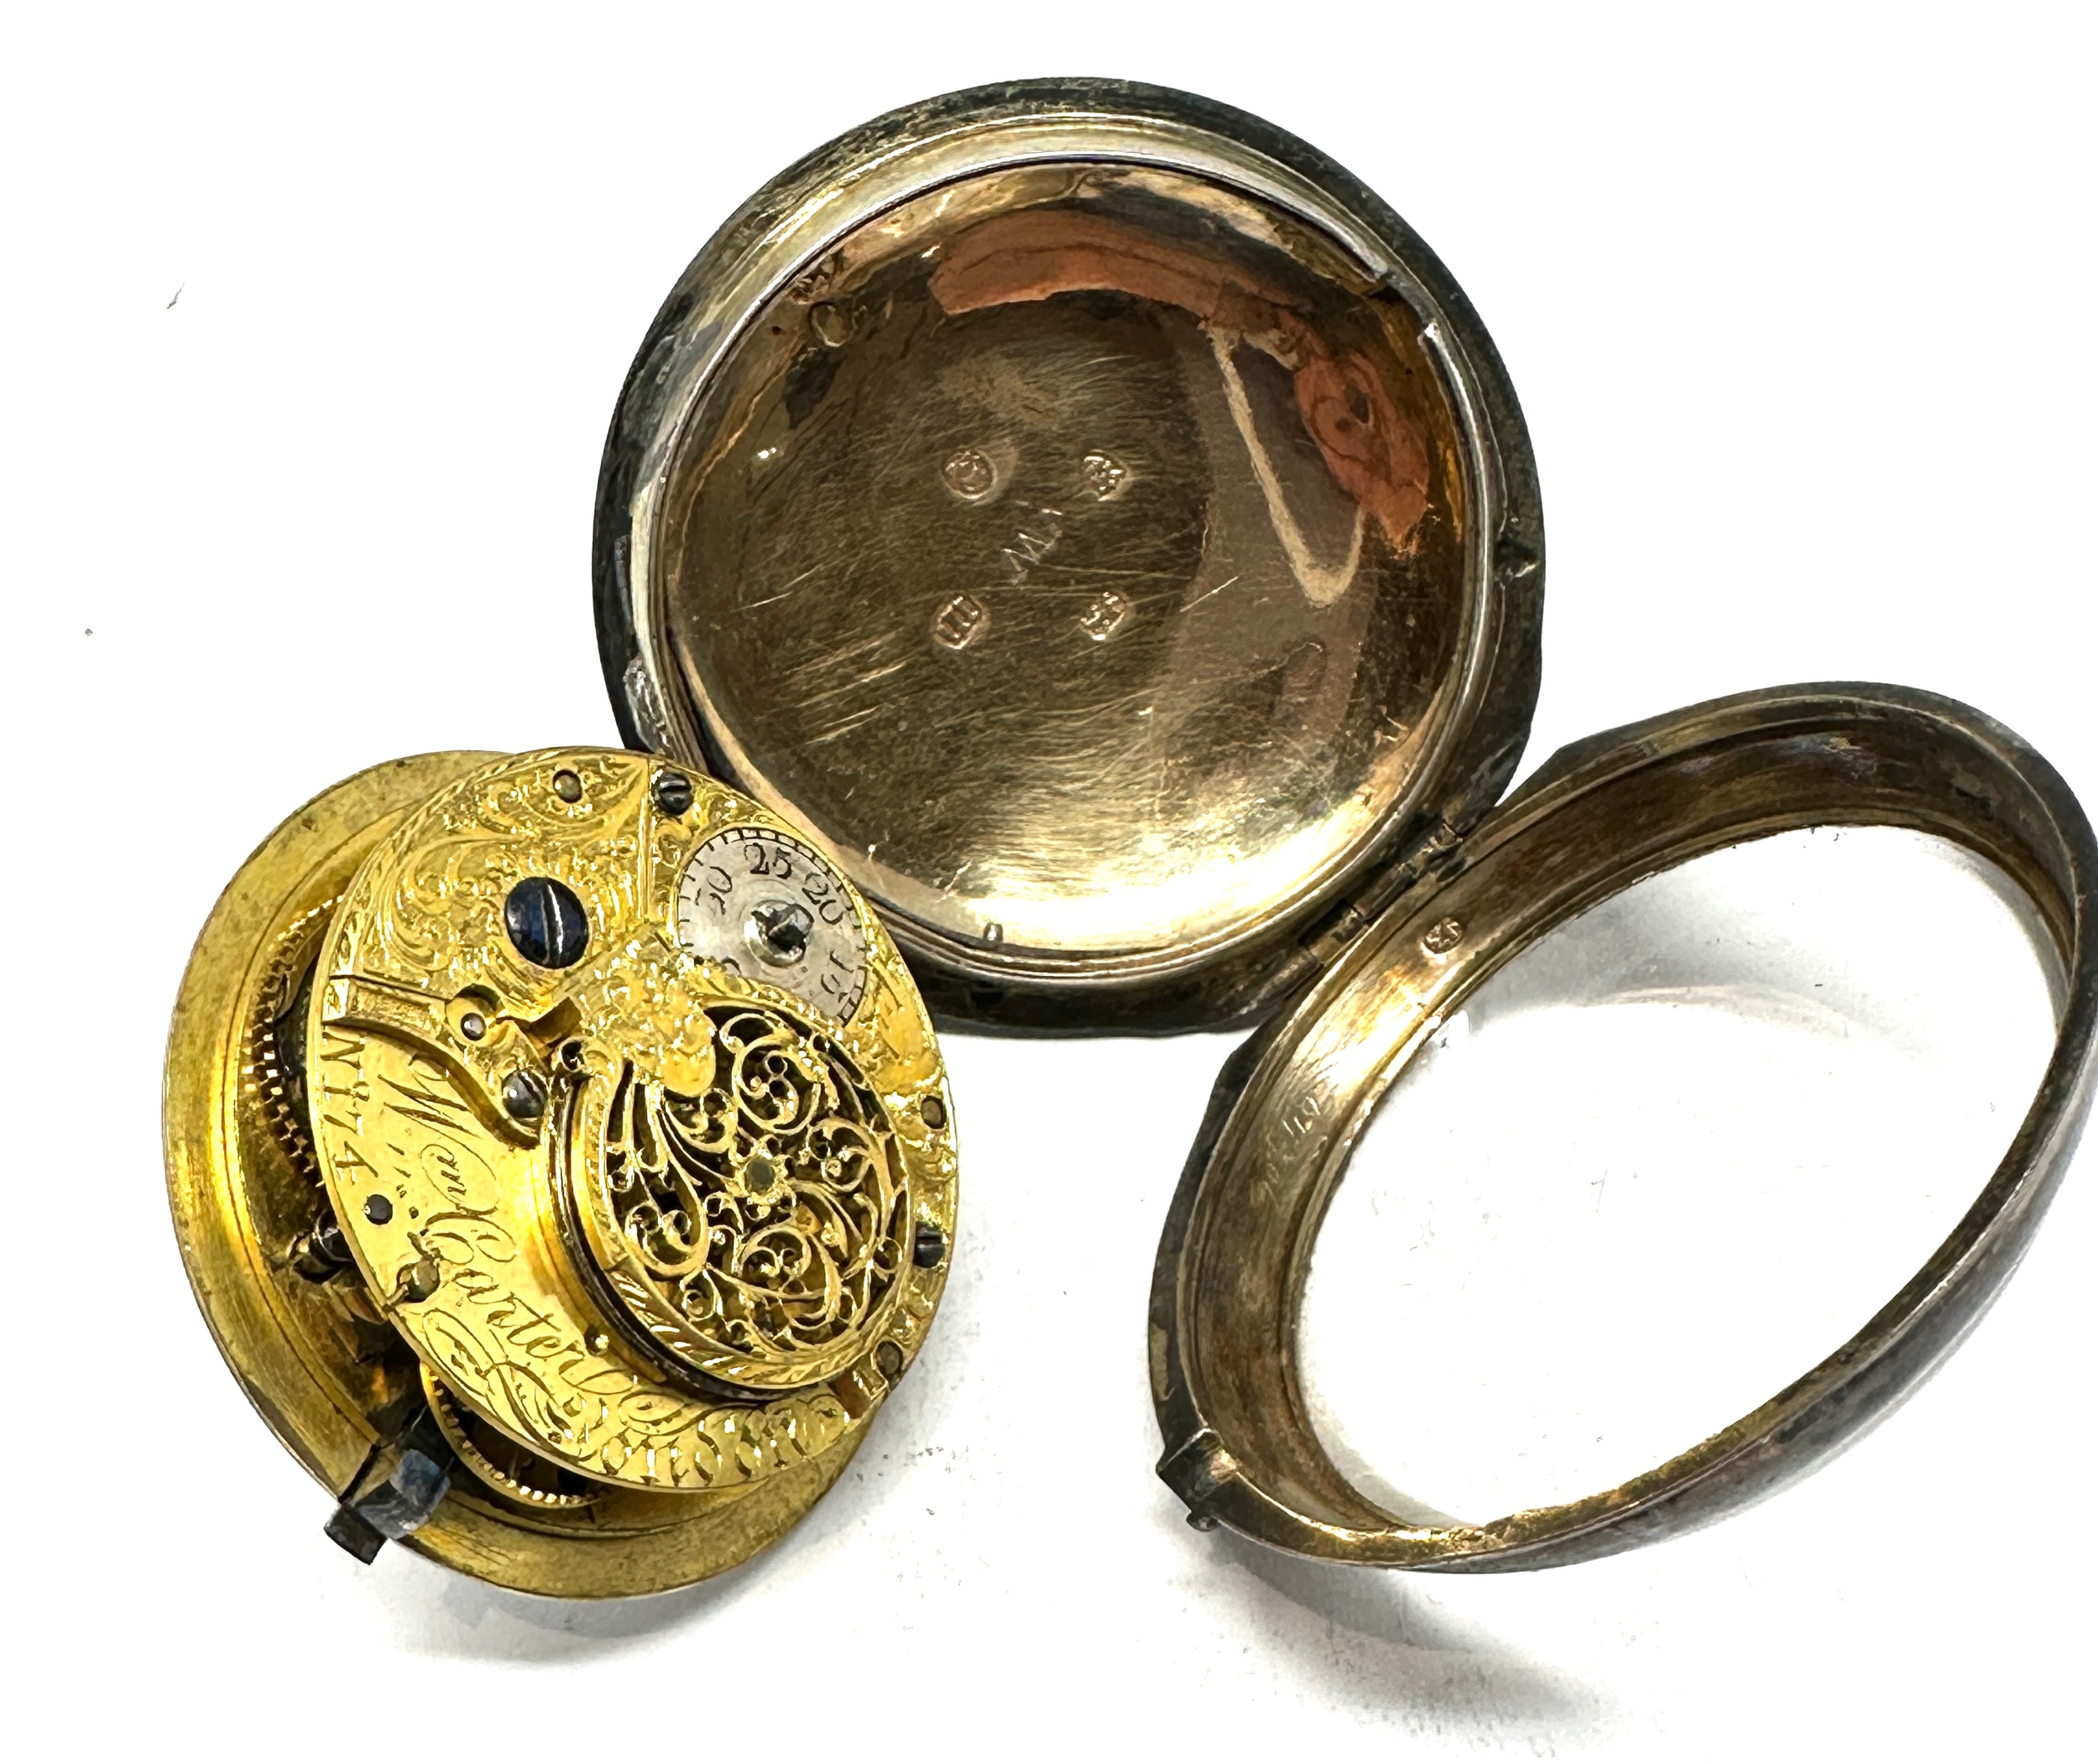 Fine 18th century verge pocket watch by Wm Carter London the watch is ticking case hallmarked for - Image 4 of 5